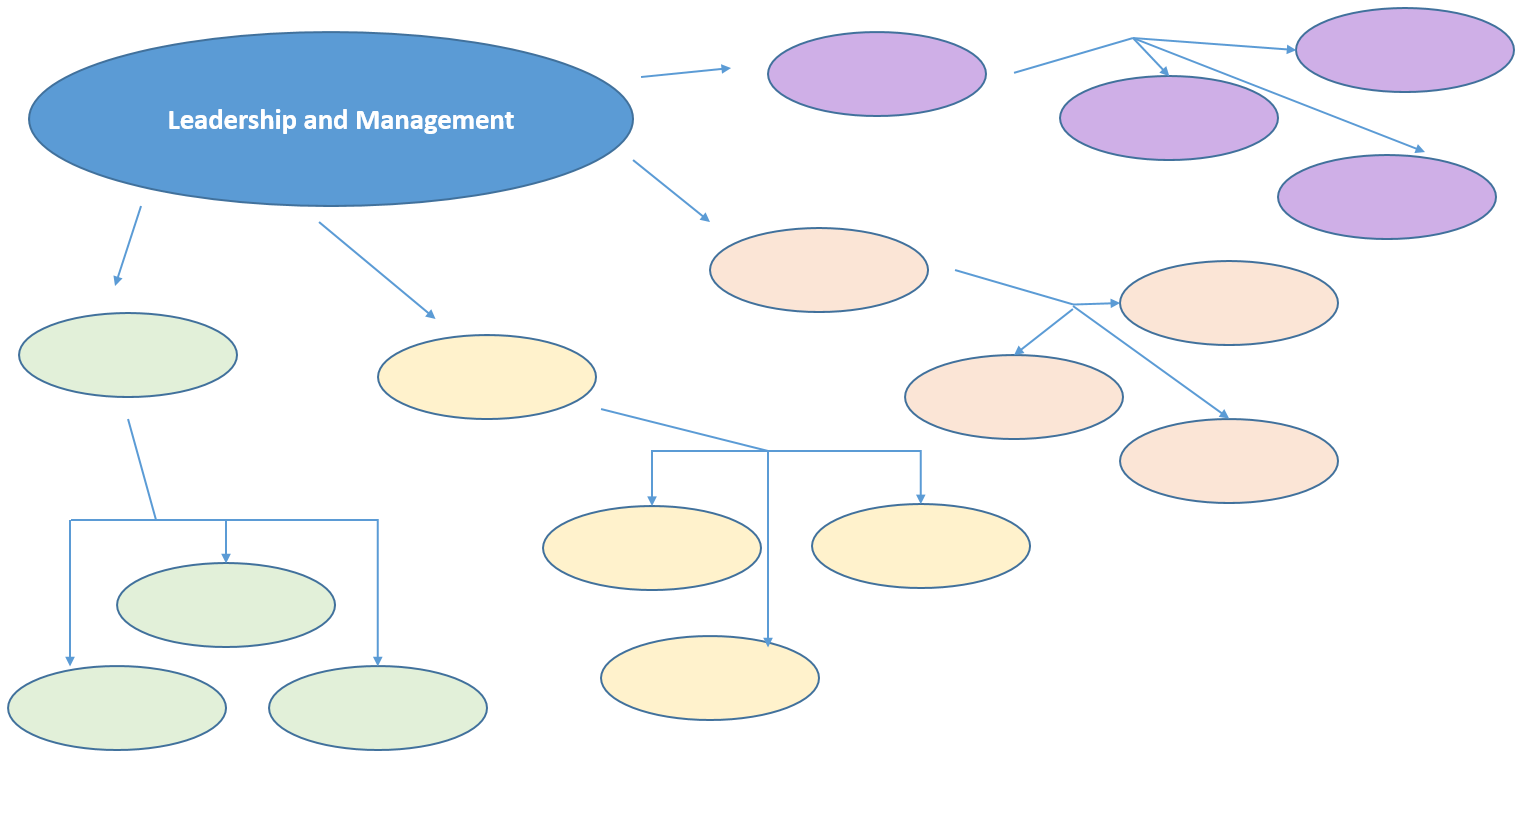 Template leadership and management concept map with one bubble saying Leadership and Management pointing to other bubbles that point to more bubbles